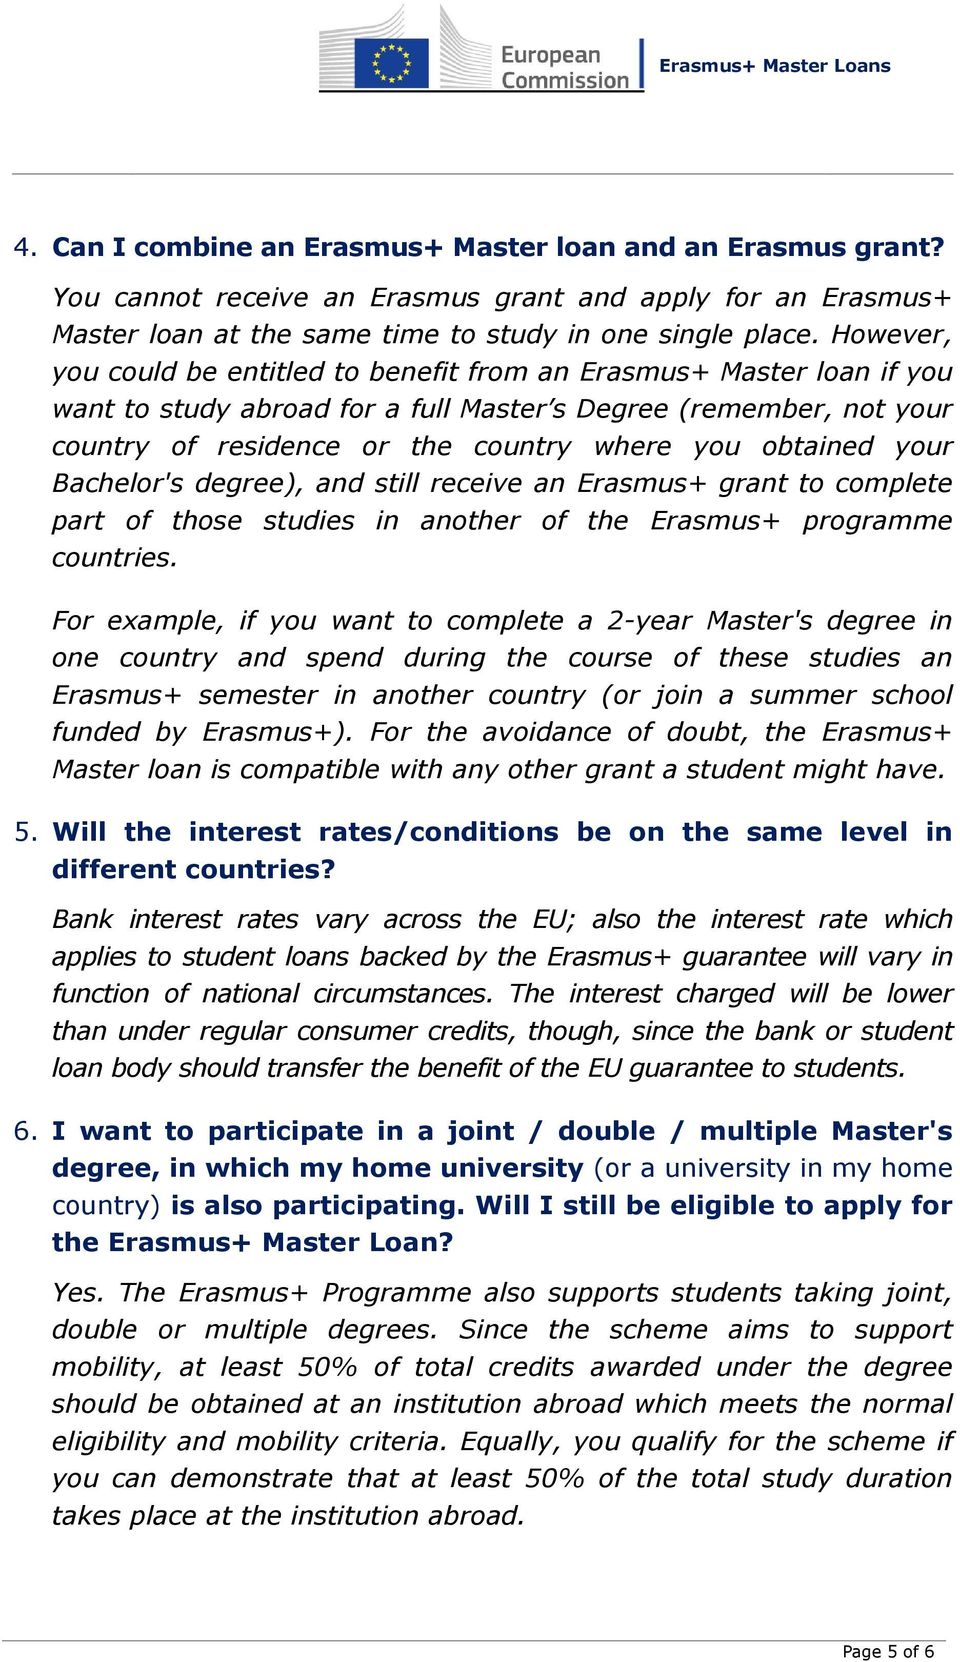 obtained your Bachelor's degree), and still receive an Erasmus+ grant to complete part of those studies in another of the Erasmus+ programme countries.